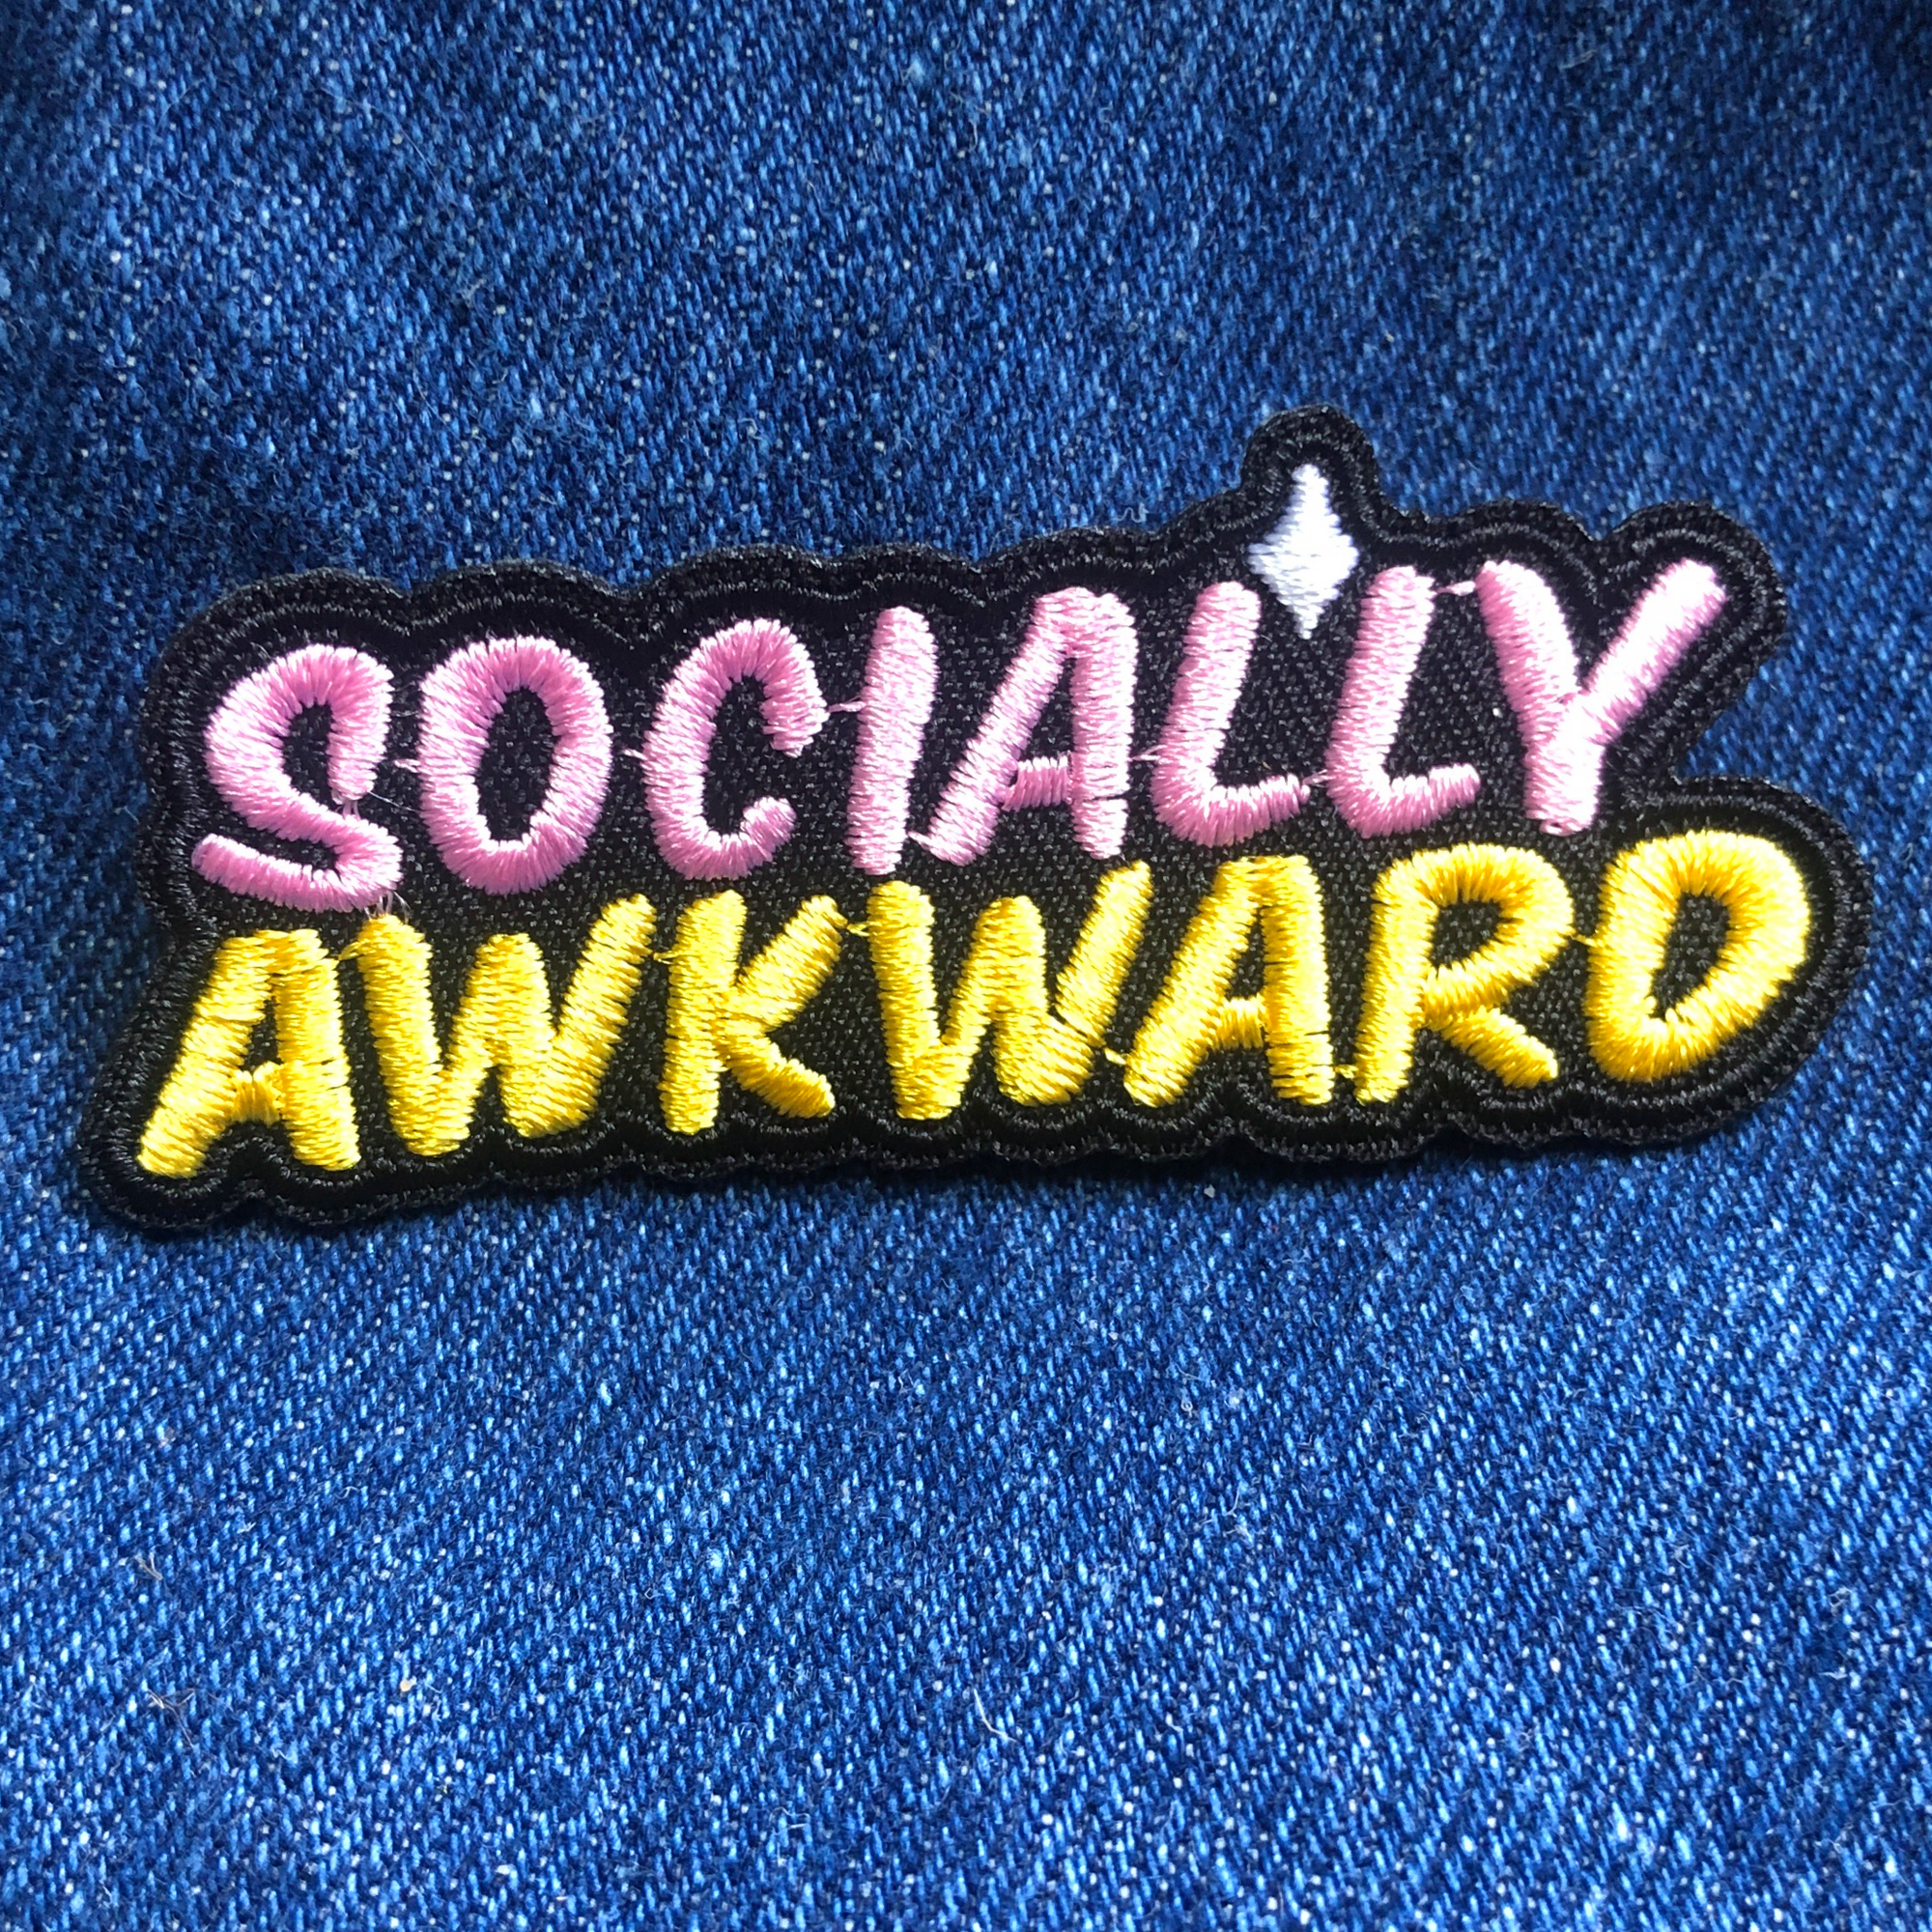 socially awkward patch, cool patch, funny patch